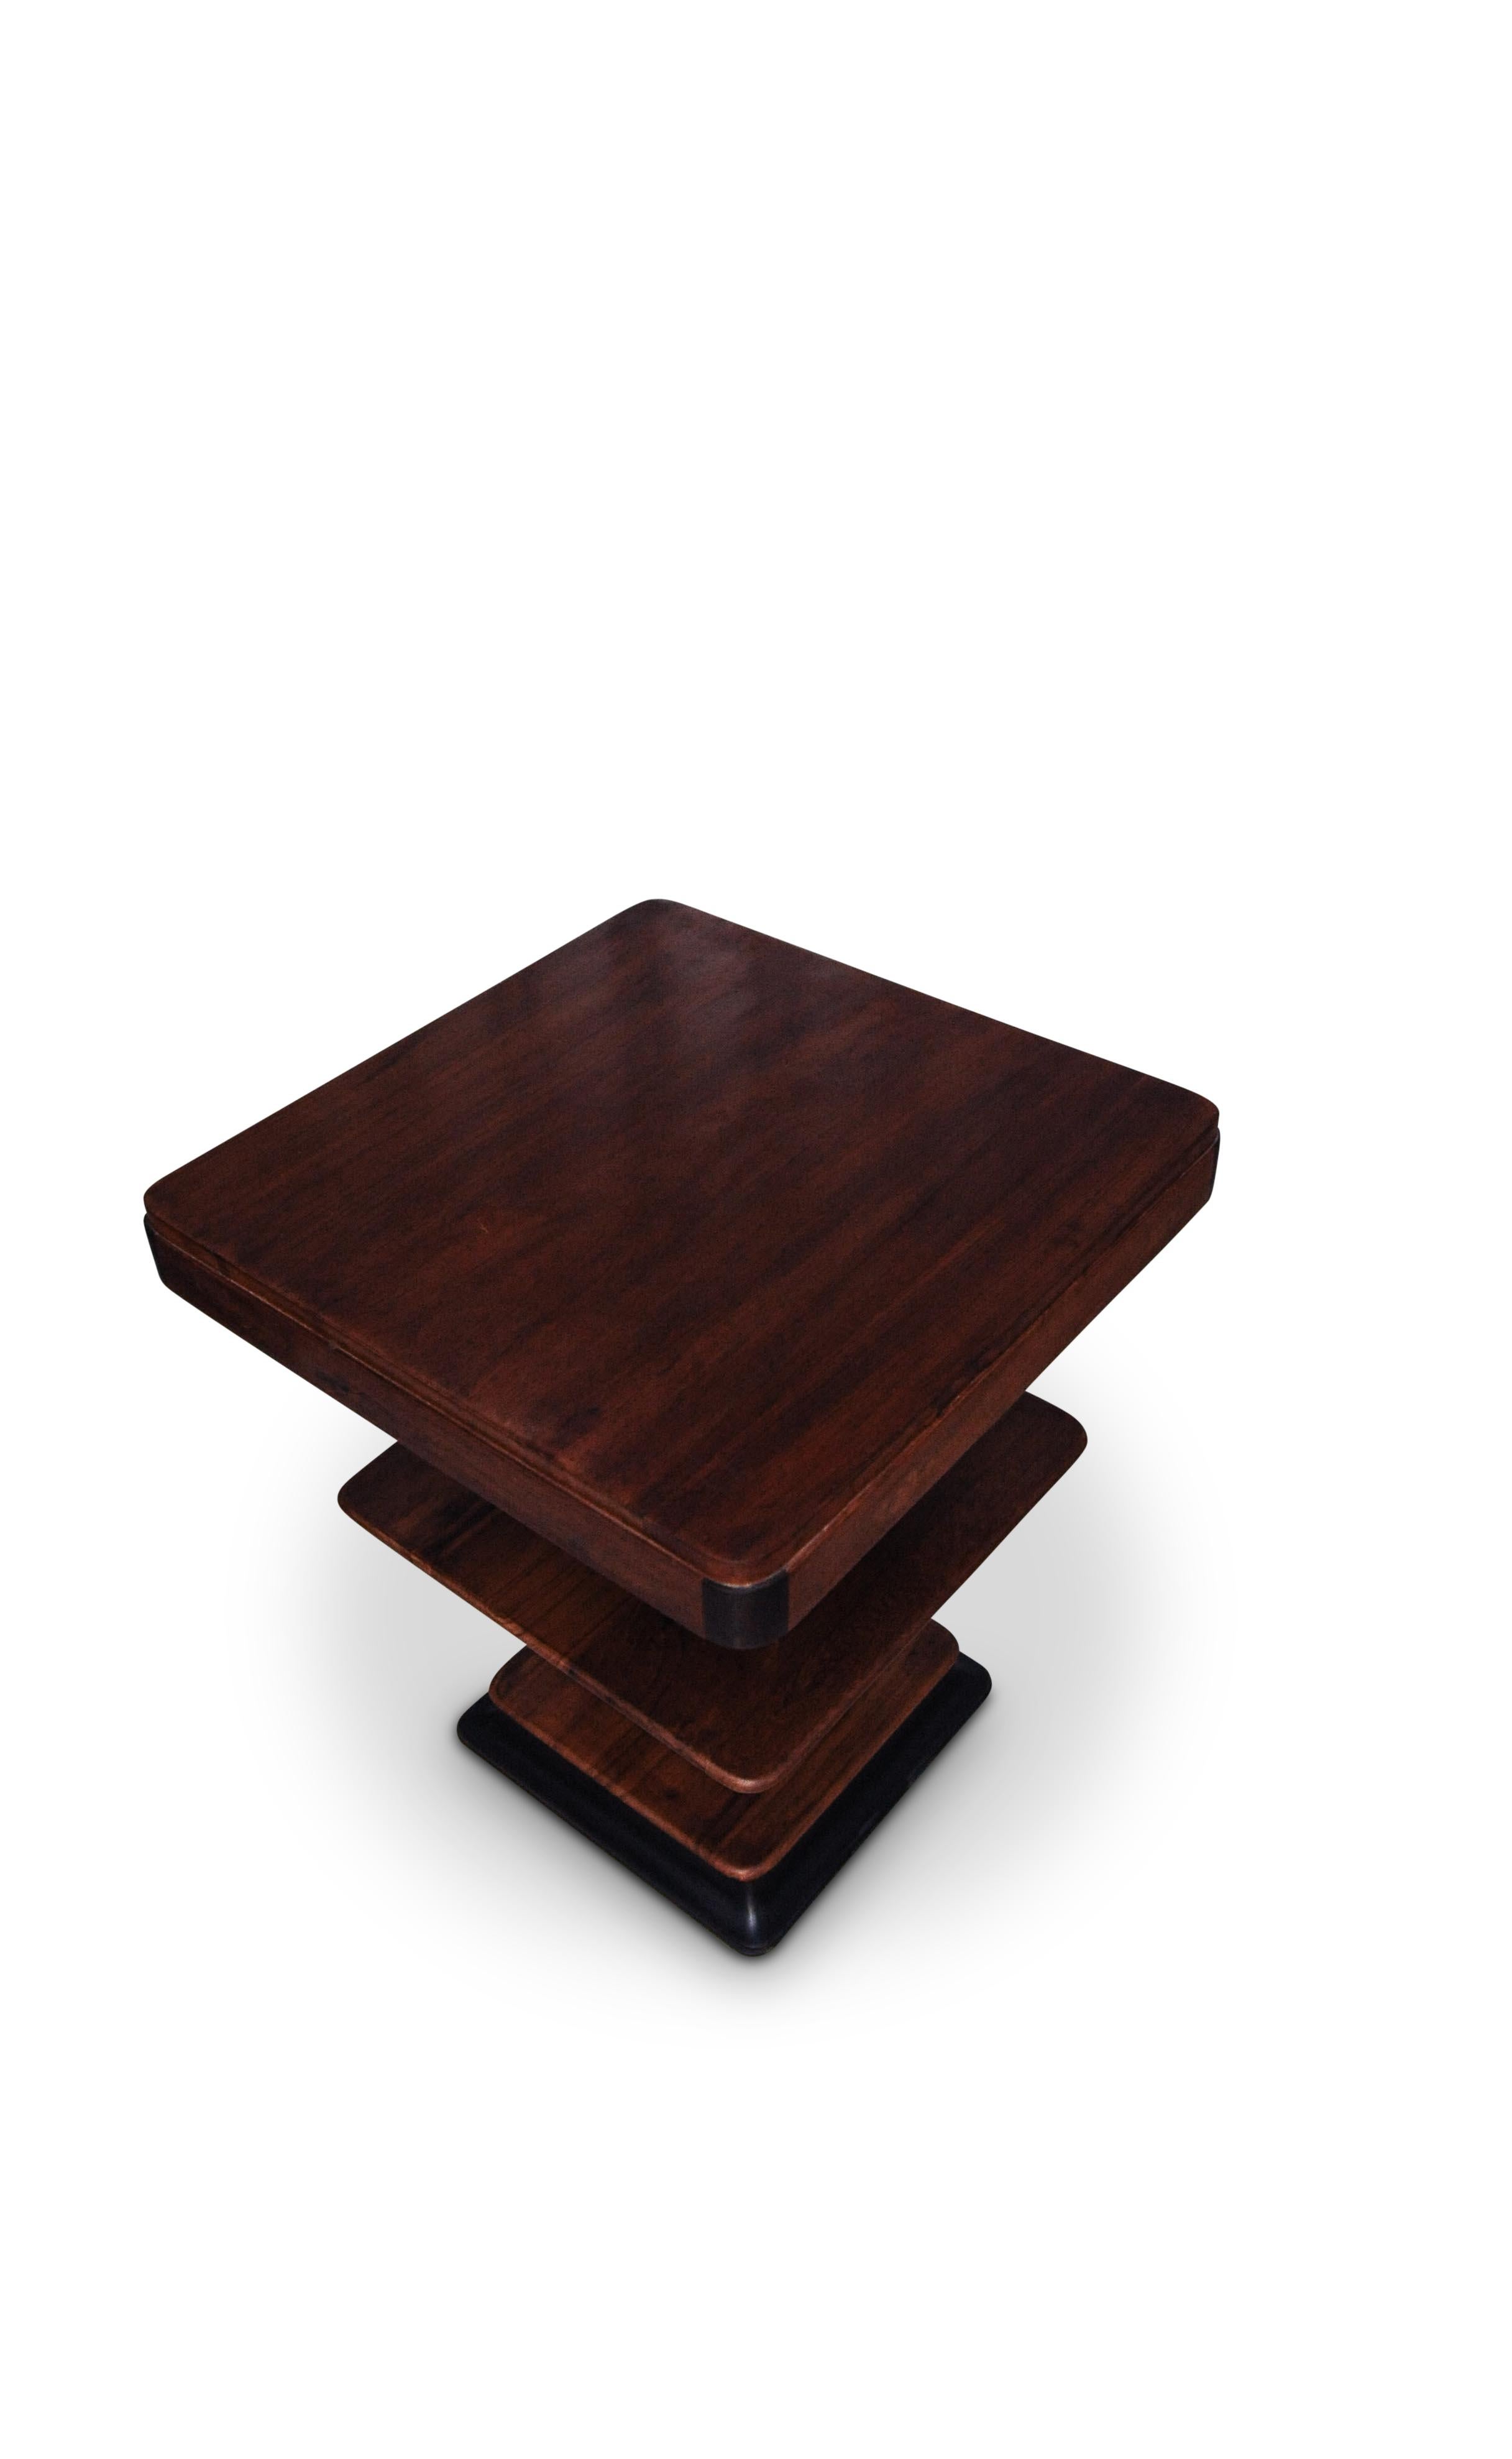 French Art Deco 1930s Walnut and Lacquered Graduated Three-Tier Side Table For Sale